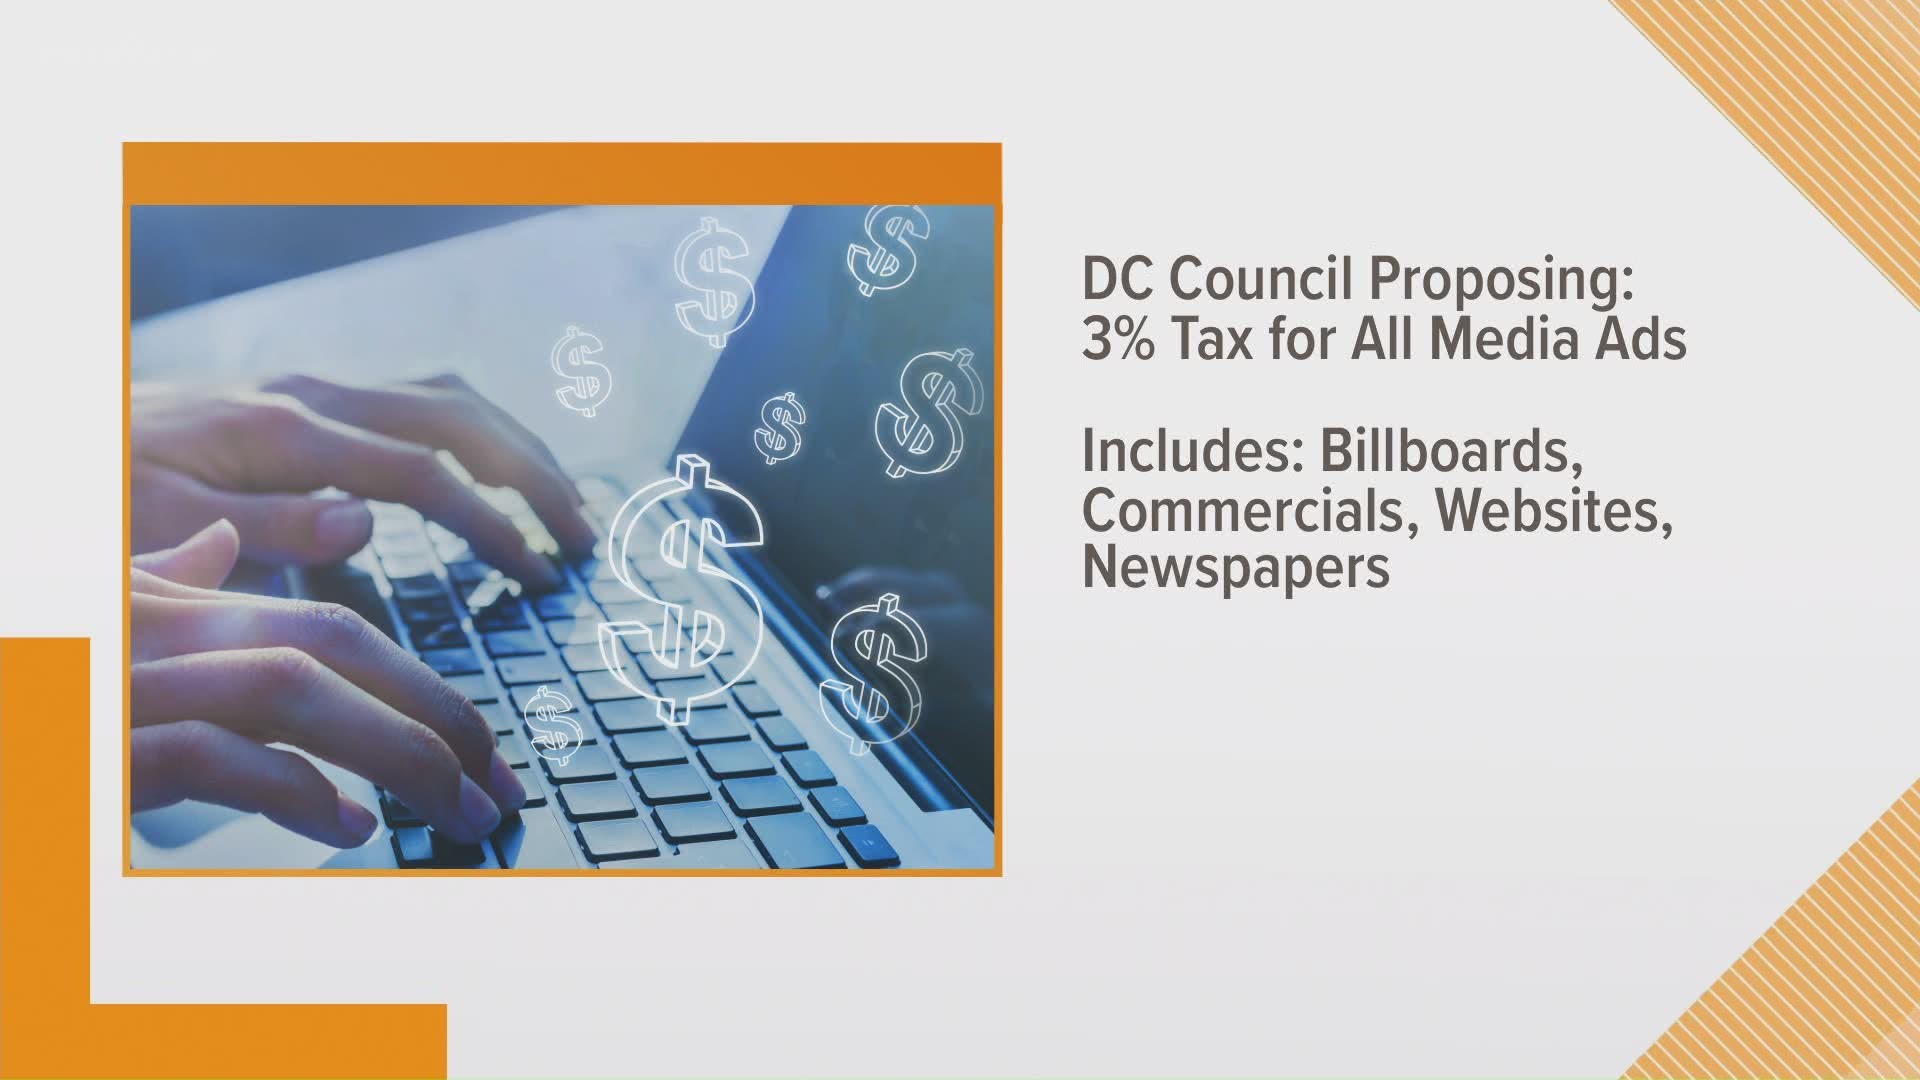 The council is looking at new revenue streams. A 3% tax on all ads is on the table.